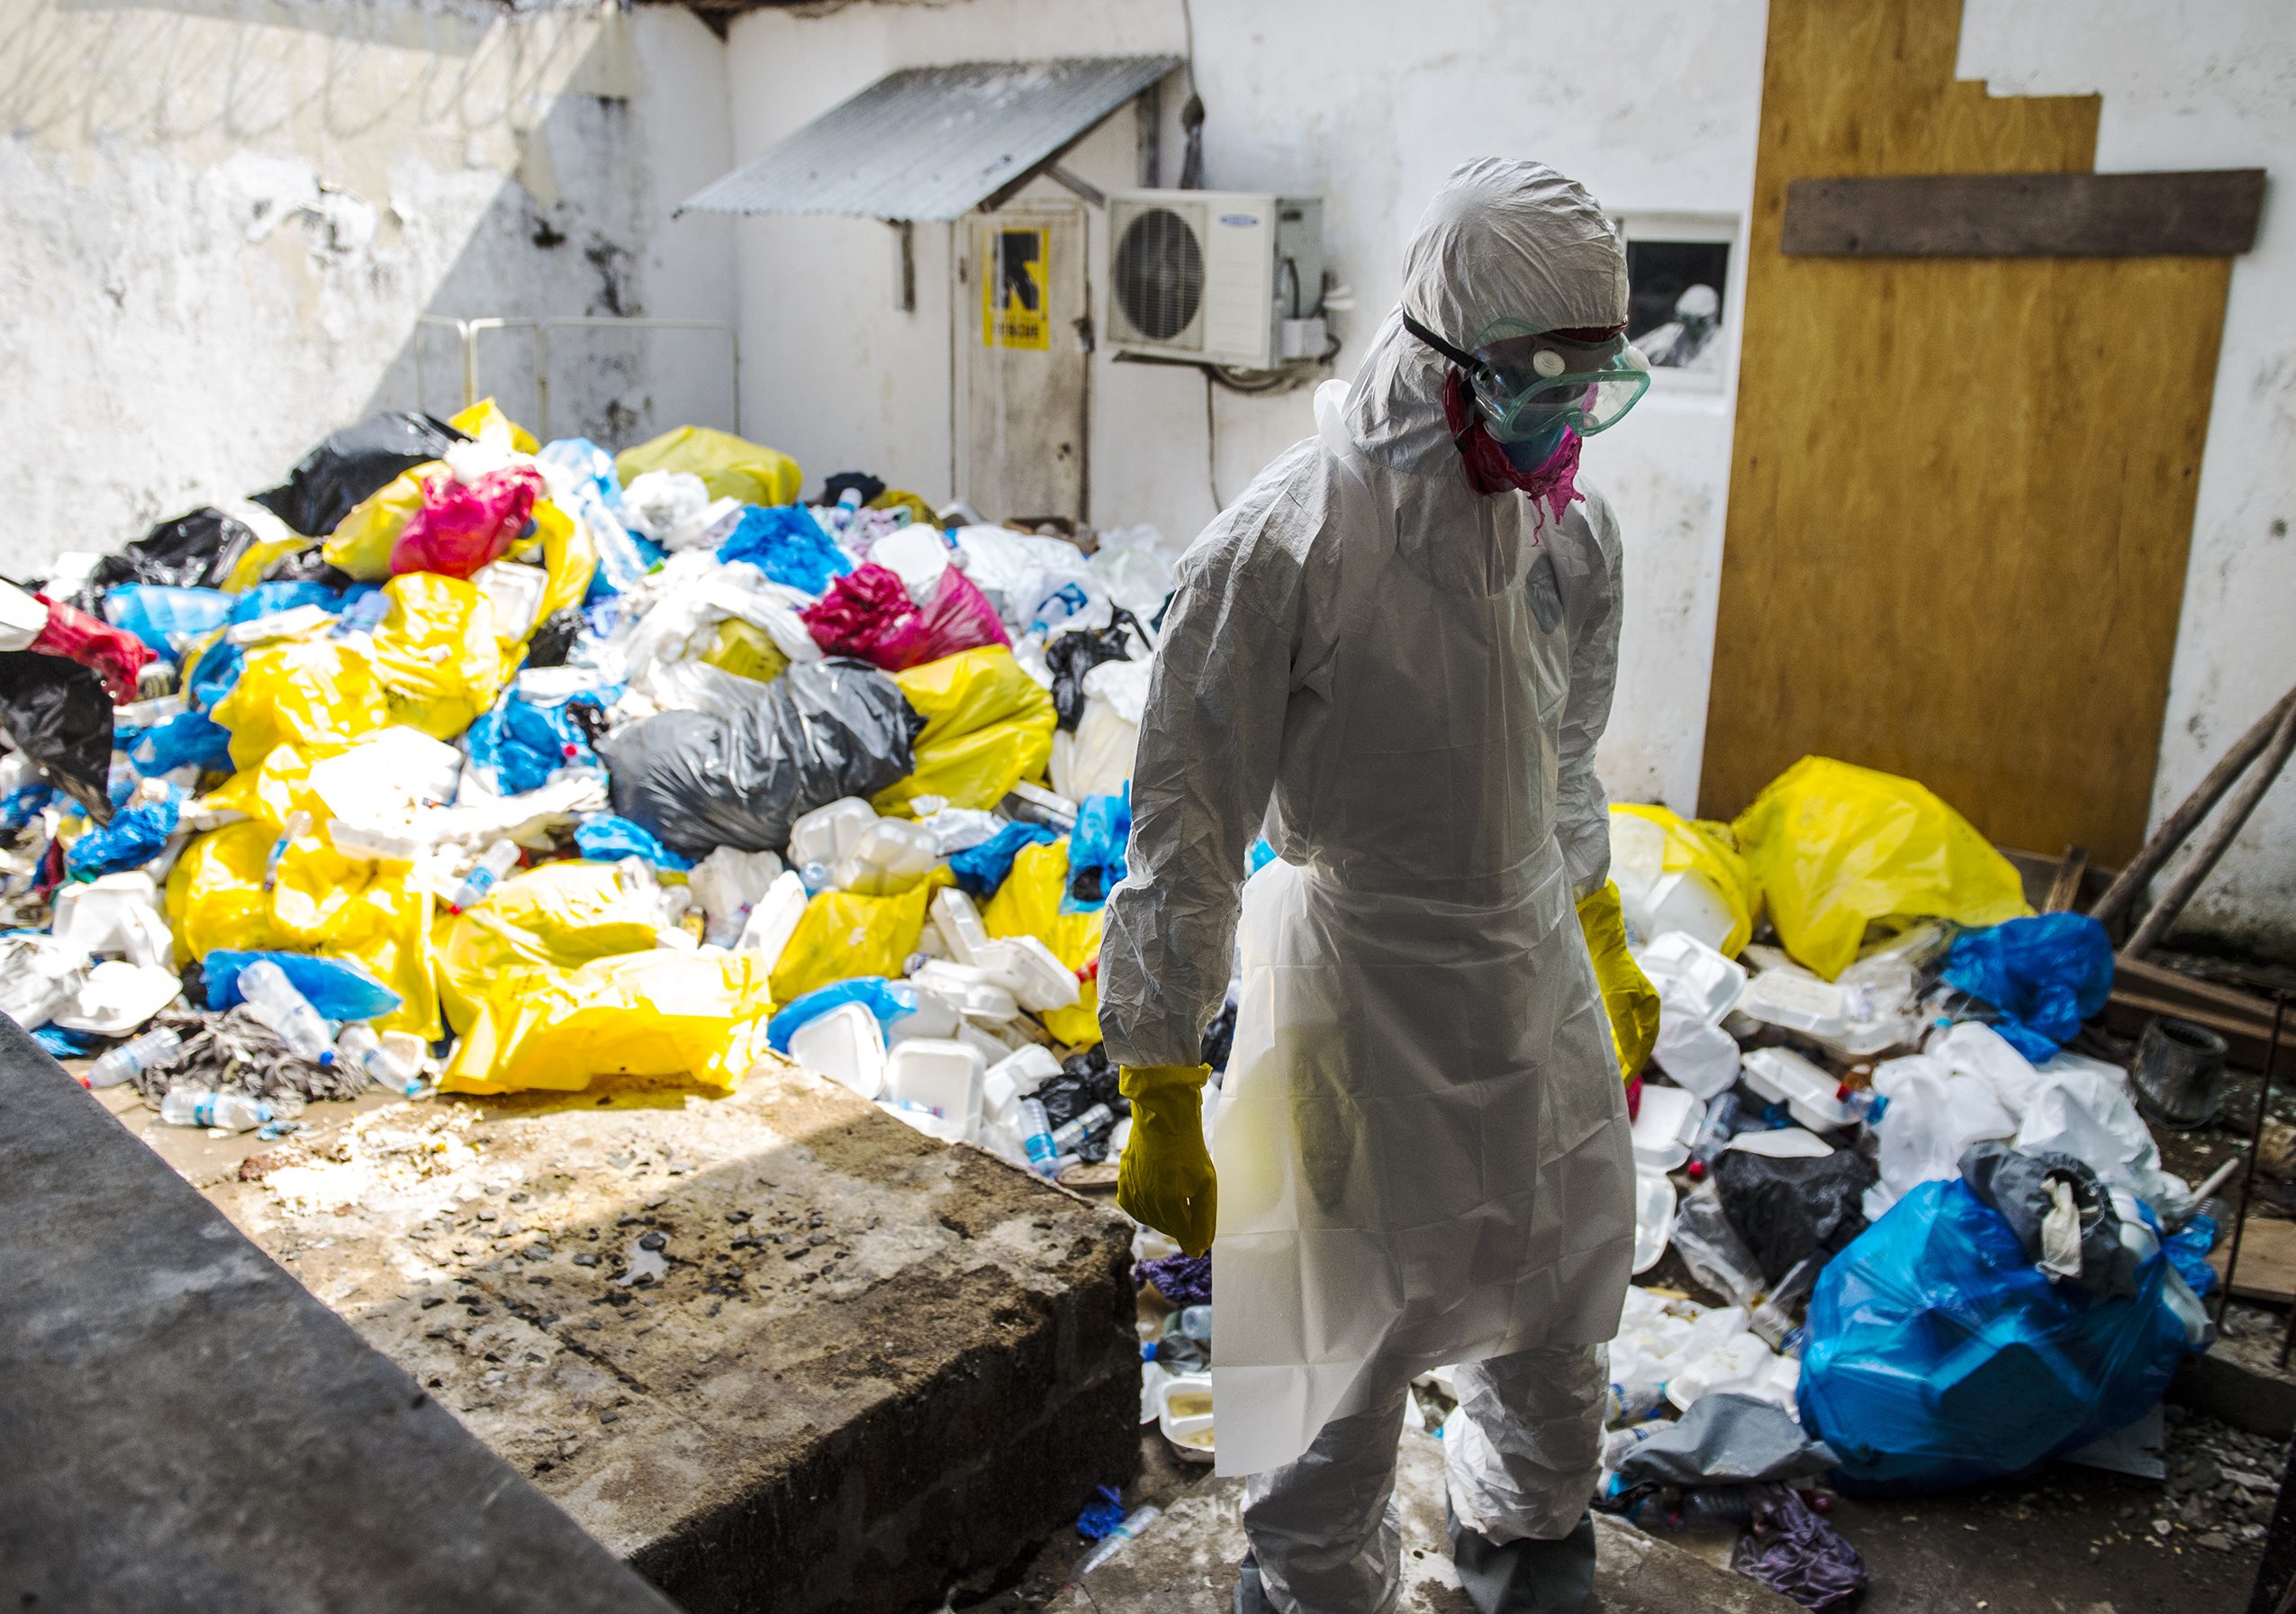 A hospital health worker stand prepares to remove garbage from Ebola patients  between wings/buildings of the Redemption  Hospital which has become a transfer and holding center to intake Ebola patients located in one of the poorest neighborhoods of Monrovia that locals call "New Kru Town on Saturday September 20, 2014 in Monrovia, Liberia. (Photo by Michel du Cille/The Washington Post via Getty Images)